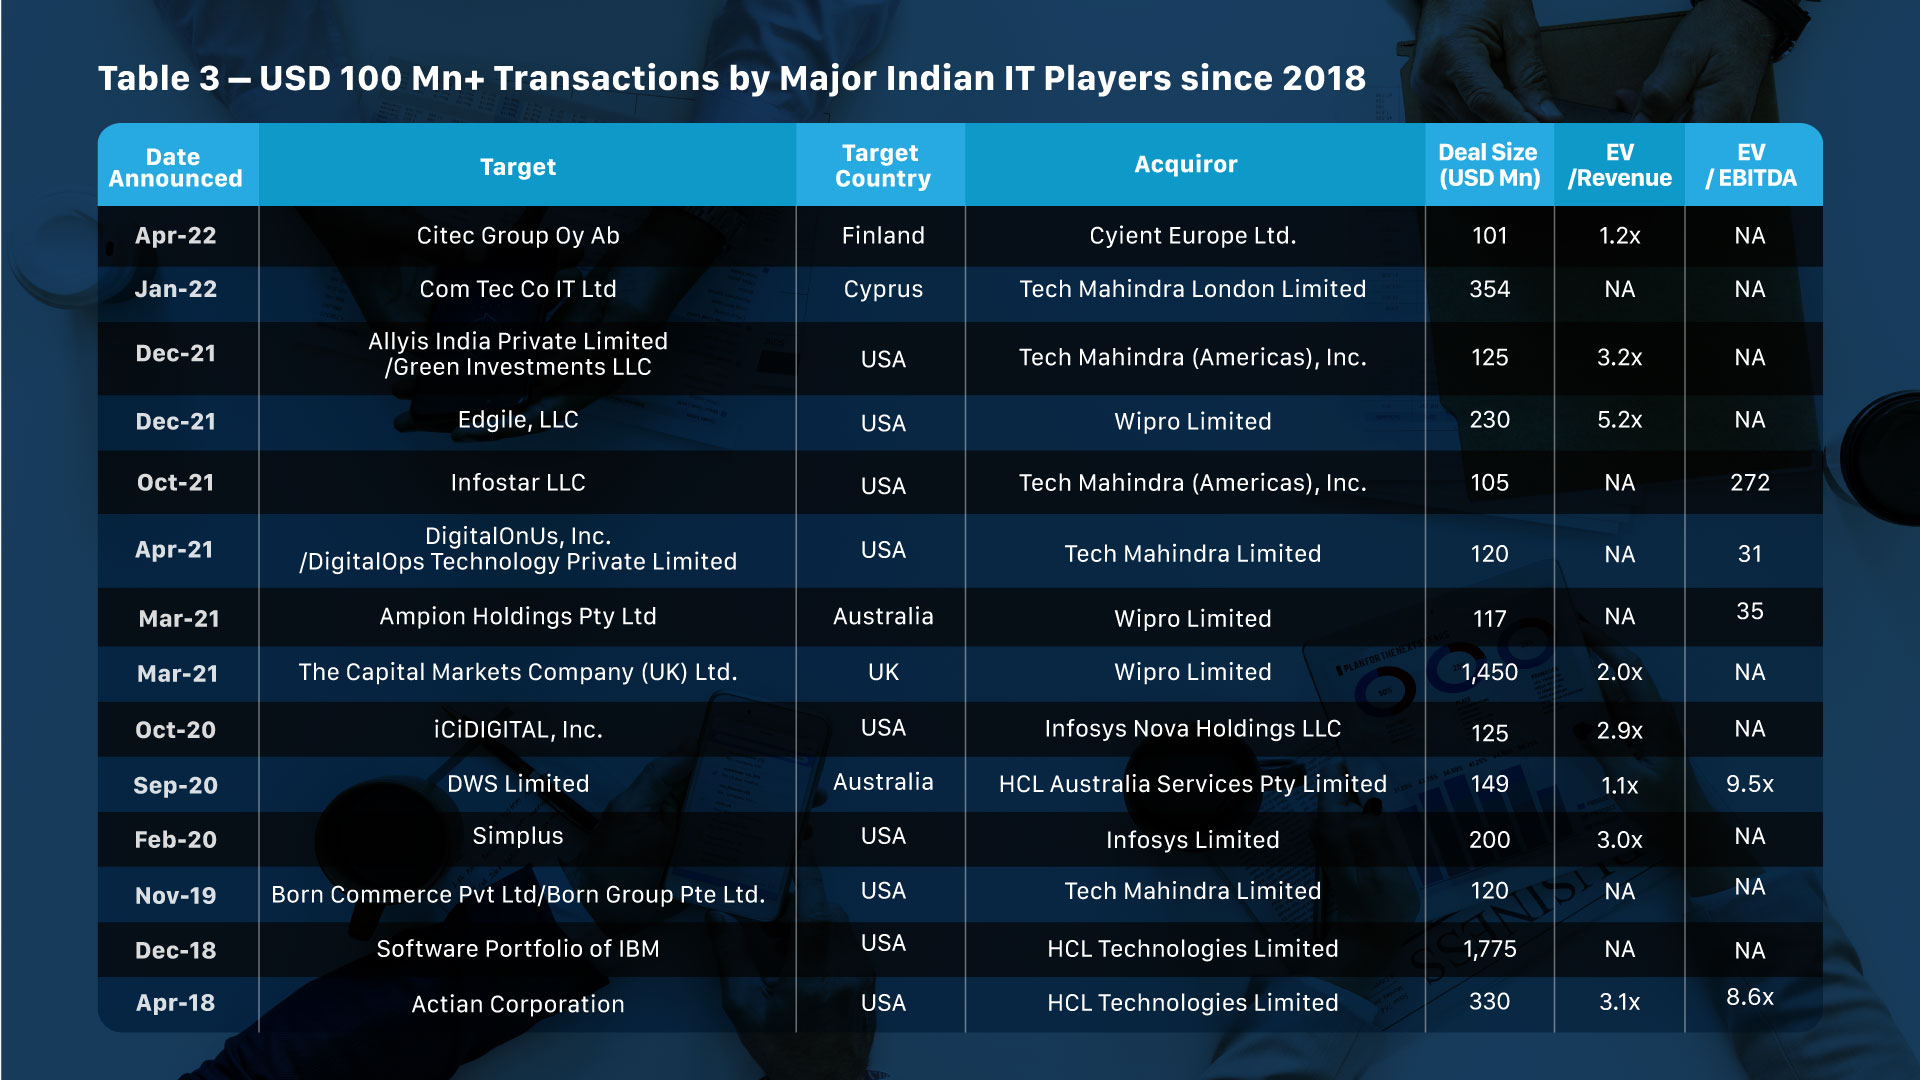 USD 100 Mn+ transactions by major IT Players since 2018